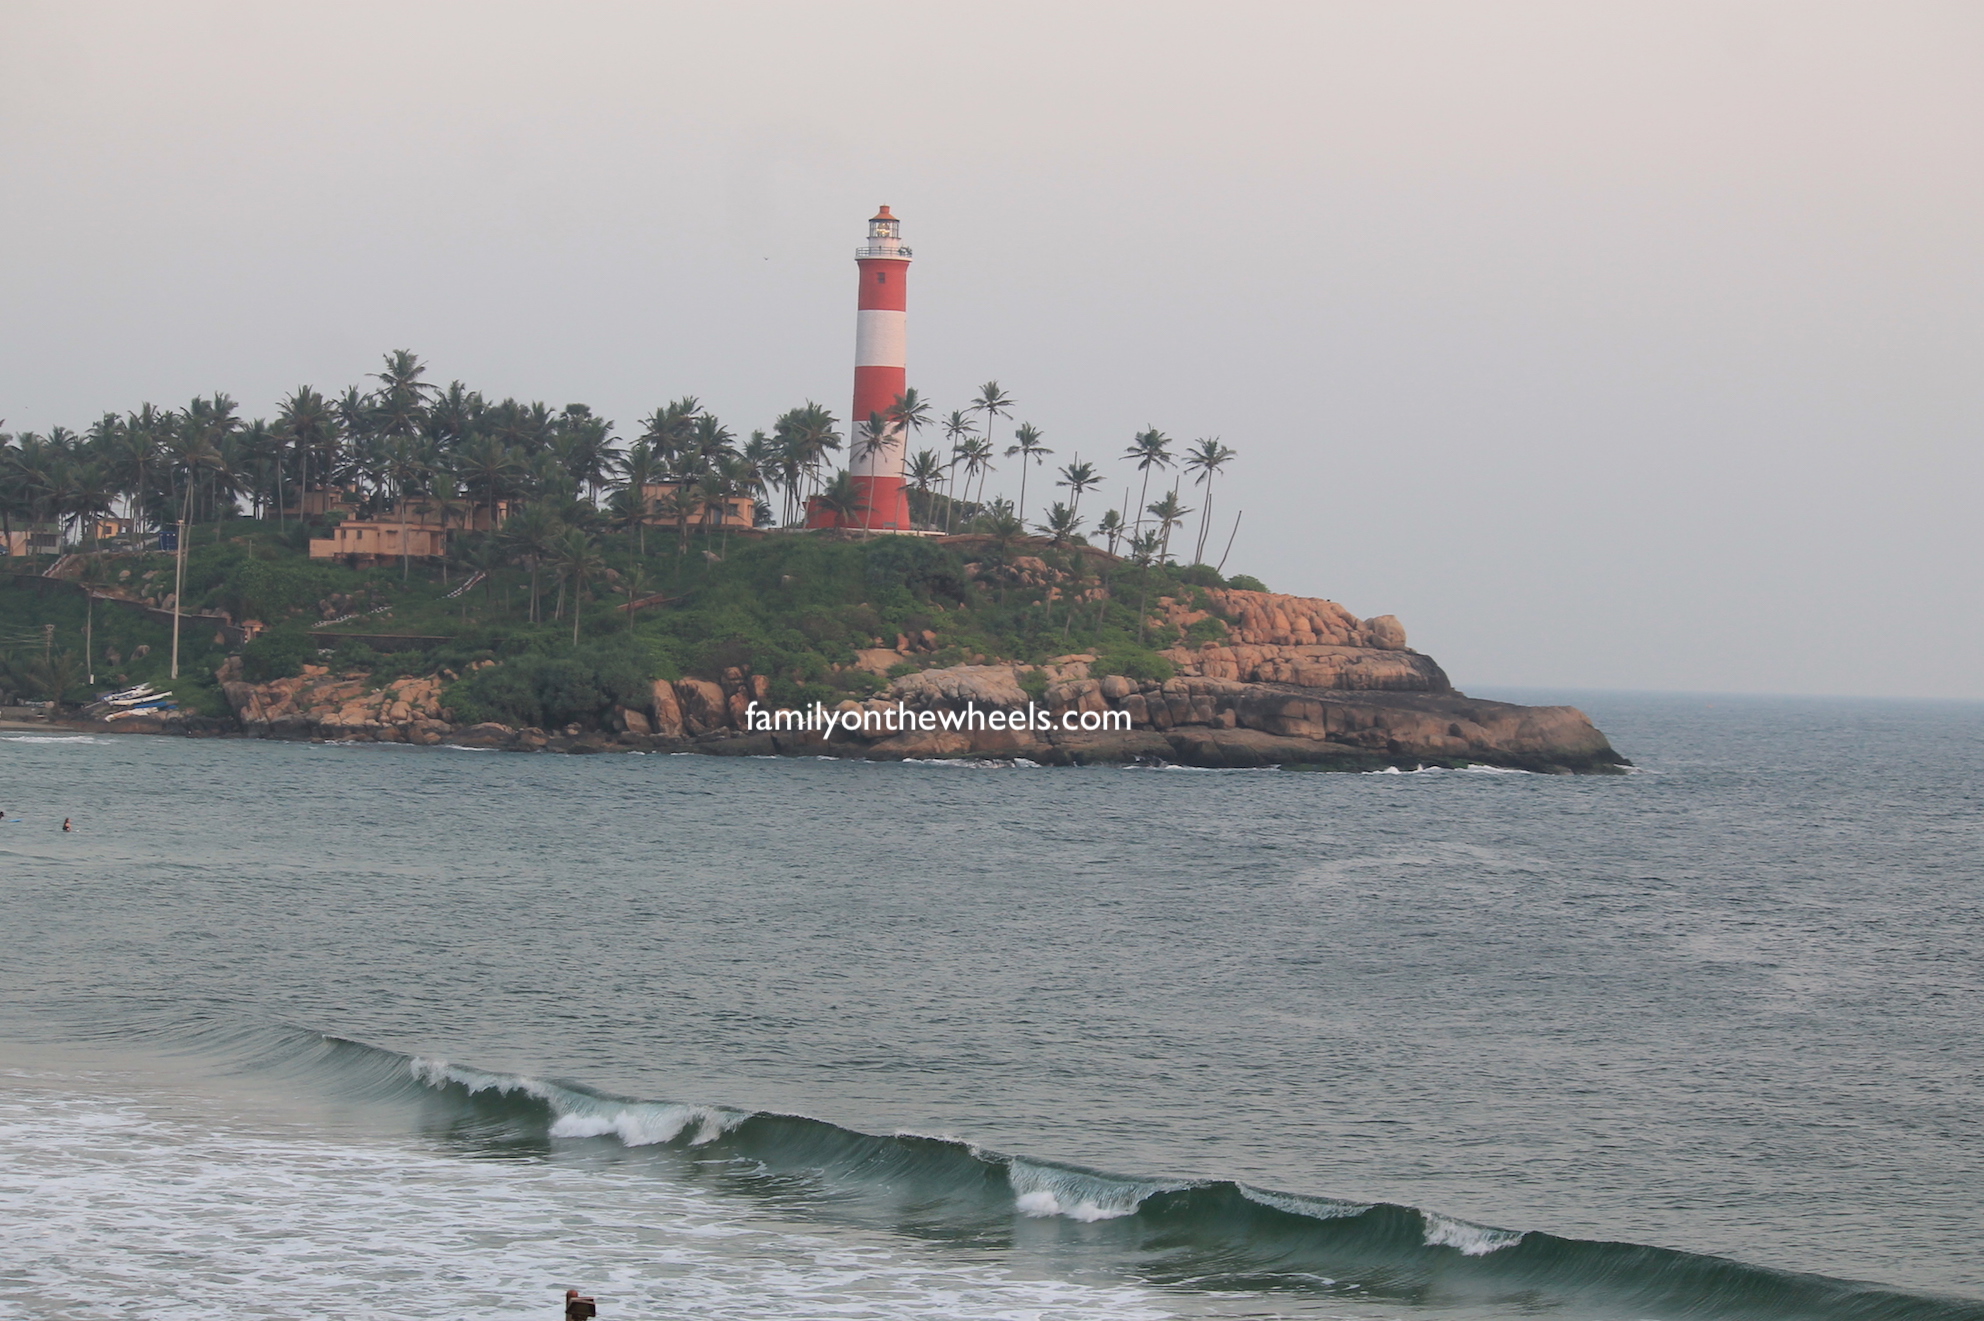 If you are at kerala, never forget to explore the mesmerizing and sunkissed Kovalam beaches, quite close to Trivandrum and easily accessible. Witnessing the best sunset over the beaches #sunset #beach #beachlove #kerala #trivandrum #kovalam #familytravel #travelbloggers